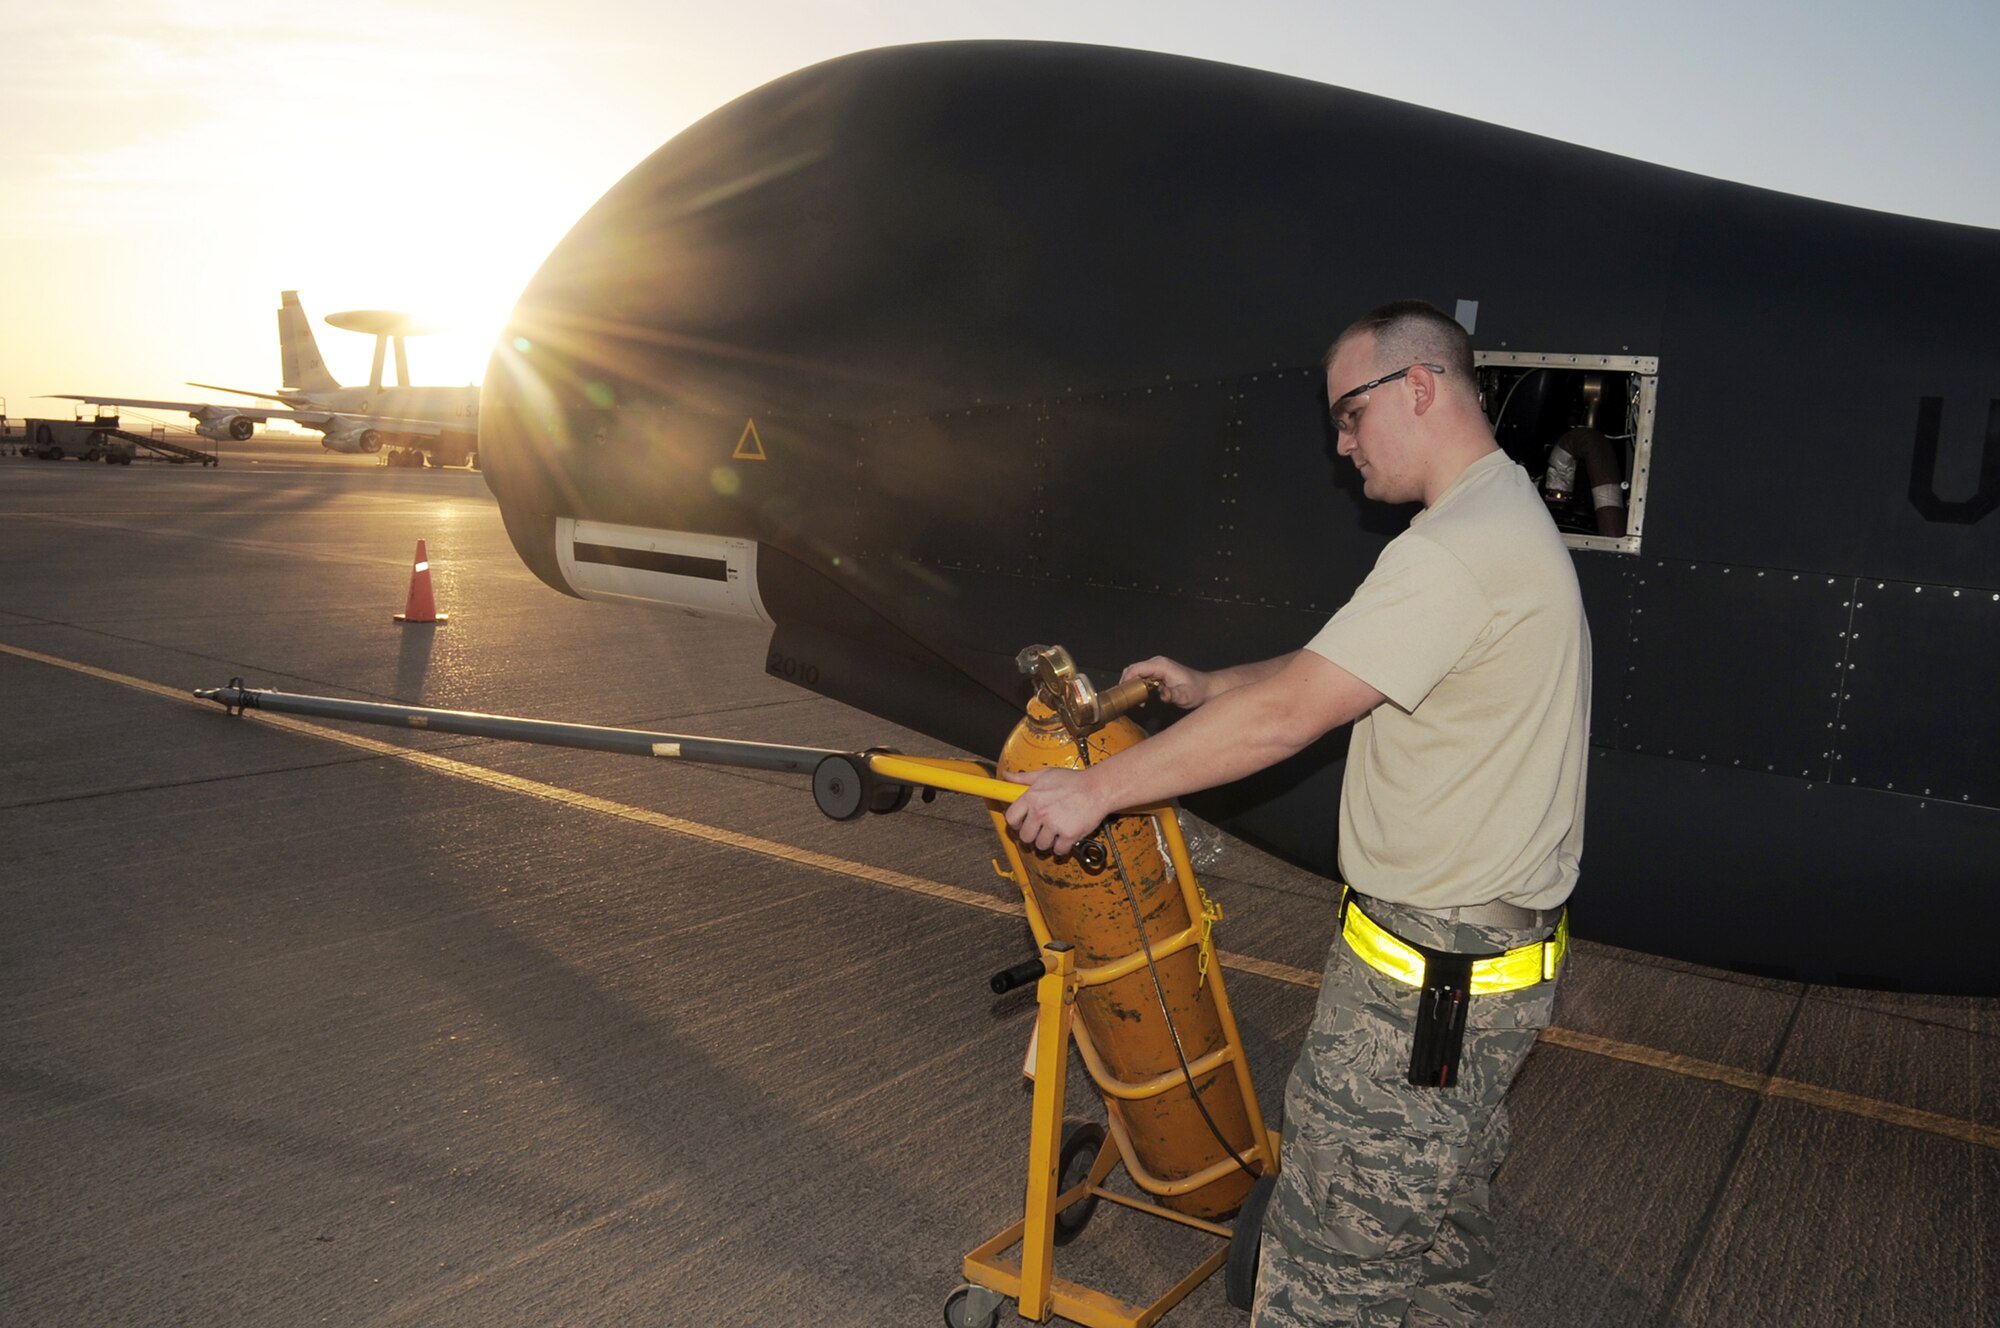 Staff Sgt. Michael Goenner goes through pre-flight servicing while preparing an RQ-4 Global Hawk for a combat mission Feb. 12, 2010, in Southwest Asia. The RQ-4s, assigned to the 380th Air Expeditionary Wing and deployed from Beale Air Force Base, Calif., achieved 1,500 combat sorties and 30,000 combat flying hours on Feb. 10 and 11 respectively. Sergeant Goenner is an RQ-4 Global Hawk crew chief with the 380th Expeditionary Aircraft Maintenance Squadron Hawk aircraft maintenance unit. (U.S. Air Force photo/Master Sgt. Scott T. Sturkol)
